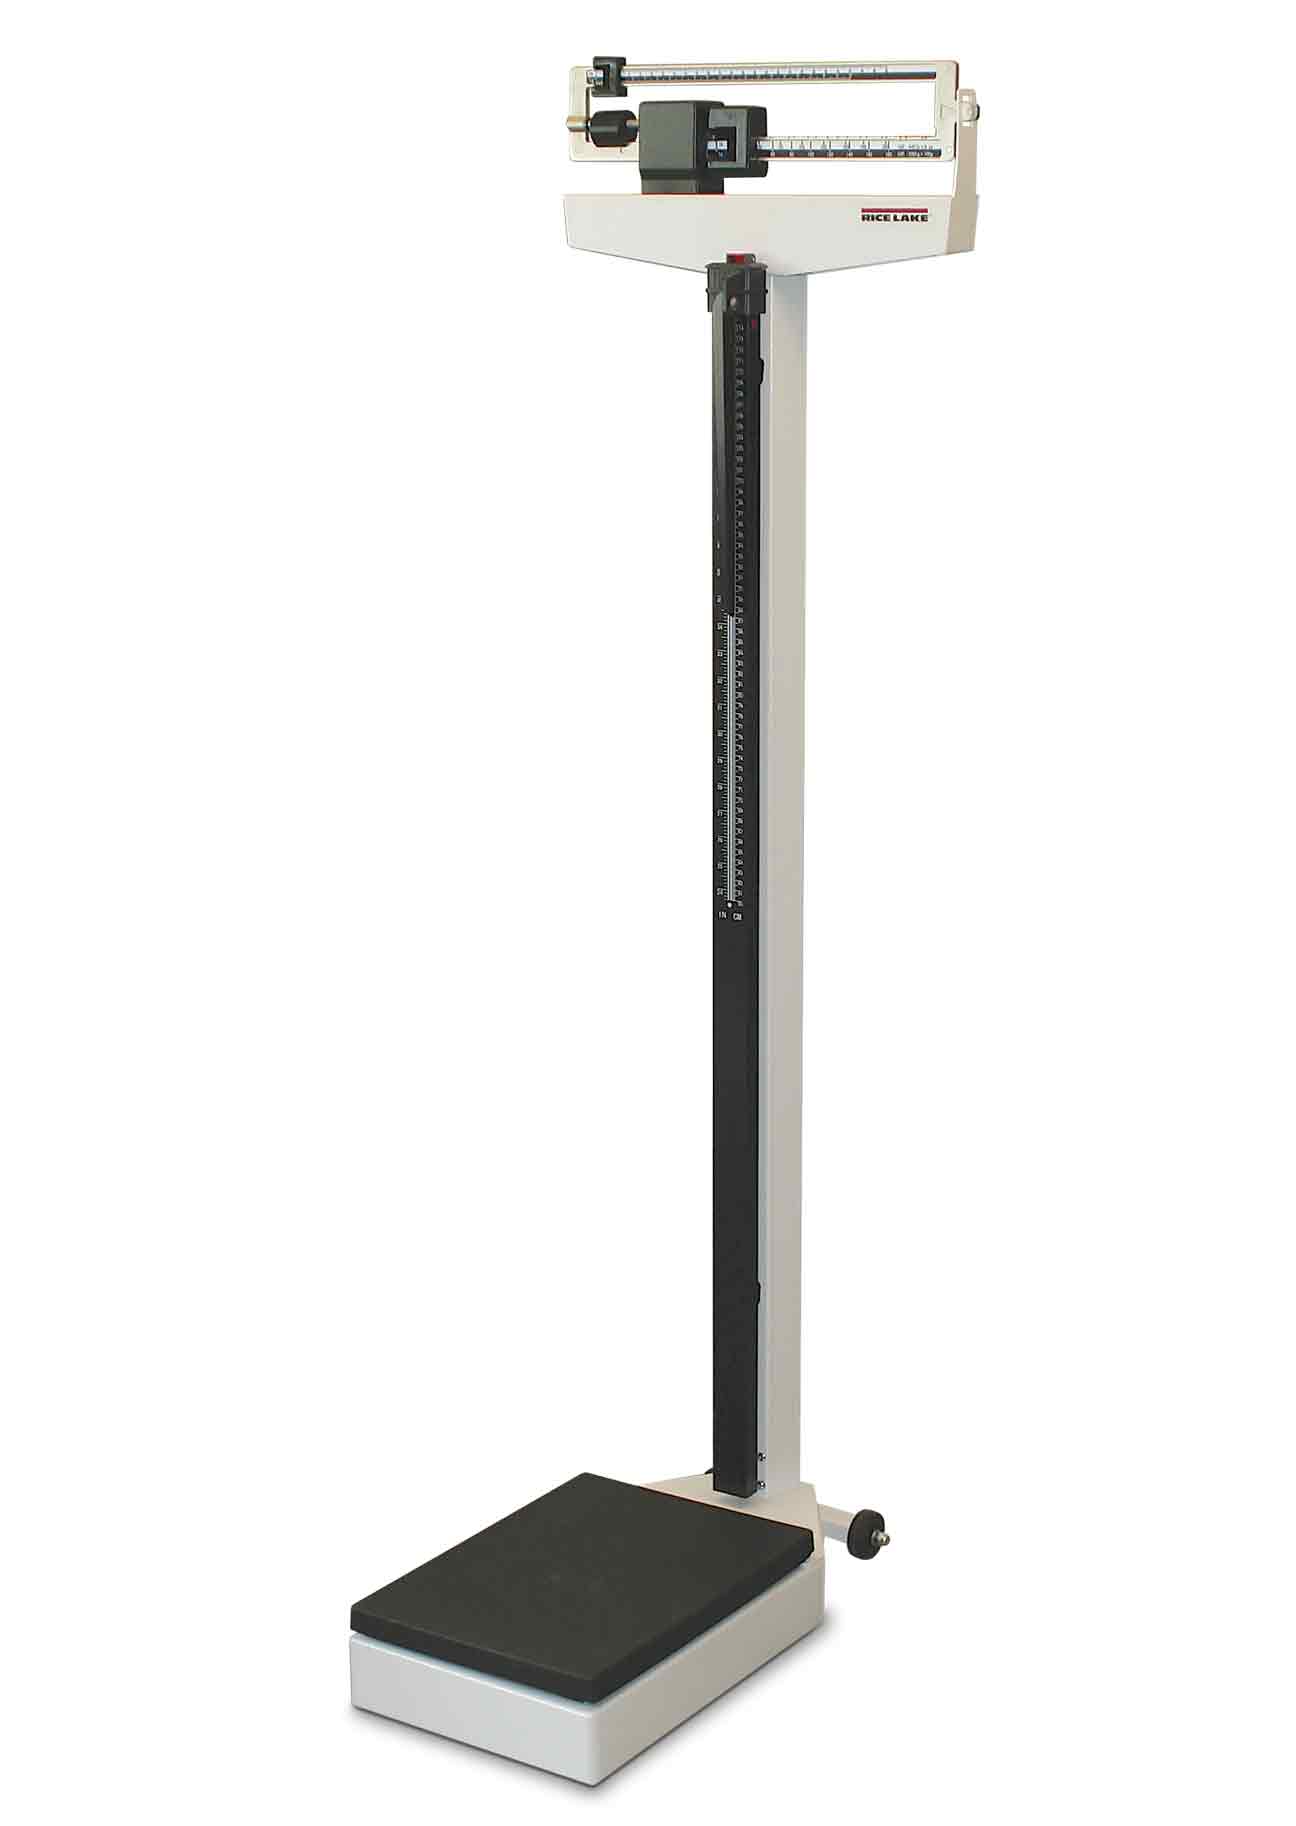 Rice Lake 102613 440lb x 4oz, RL-MPS Mechanical Physician Scale with 2 years Warranty